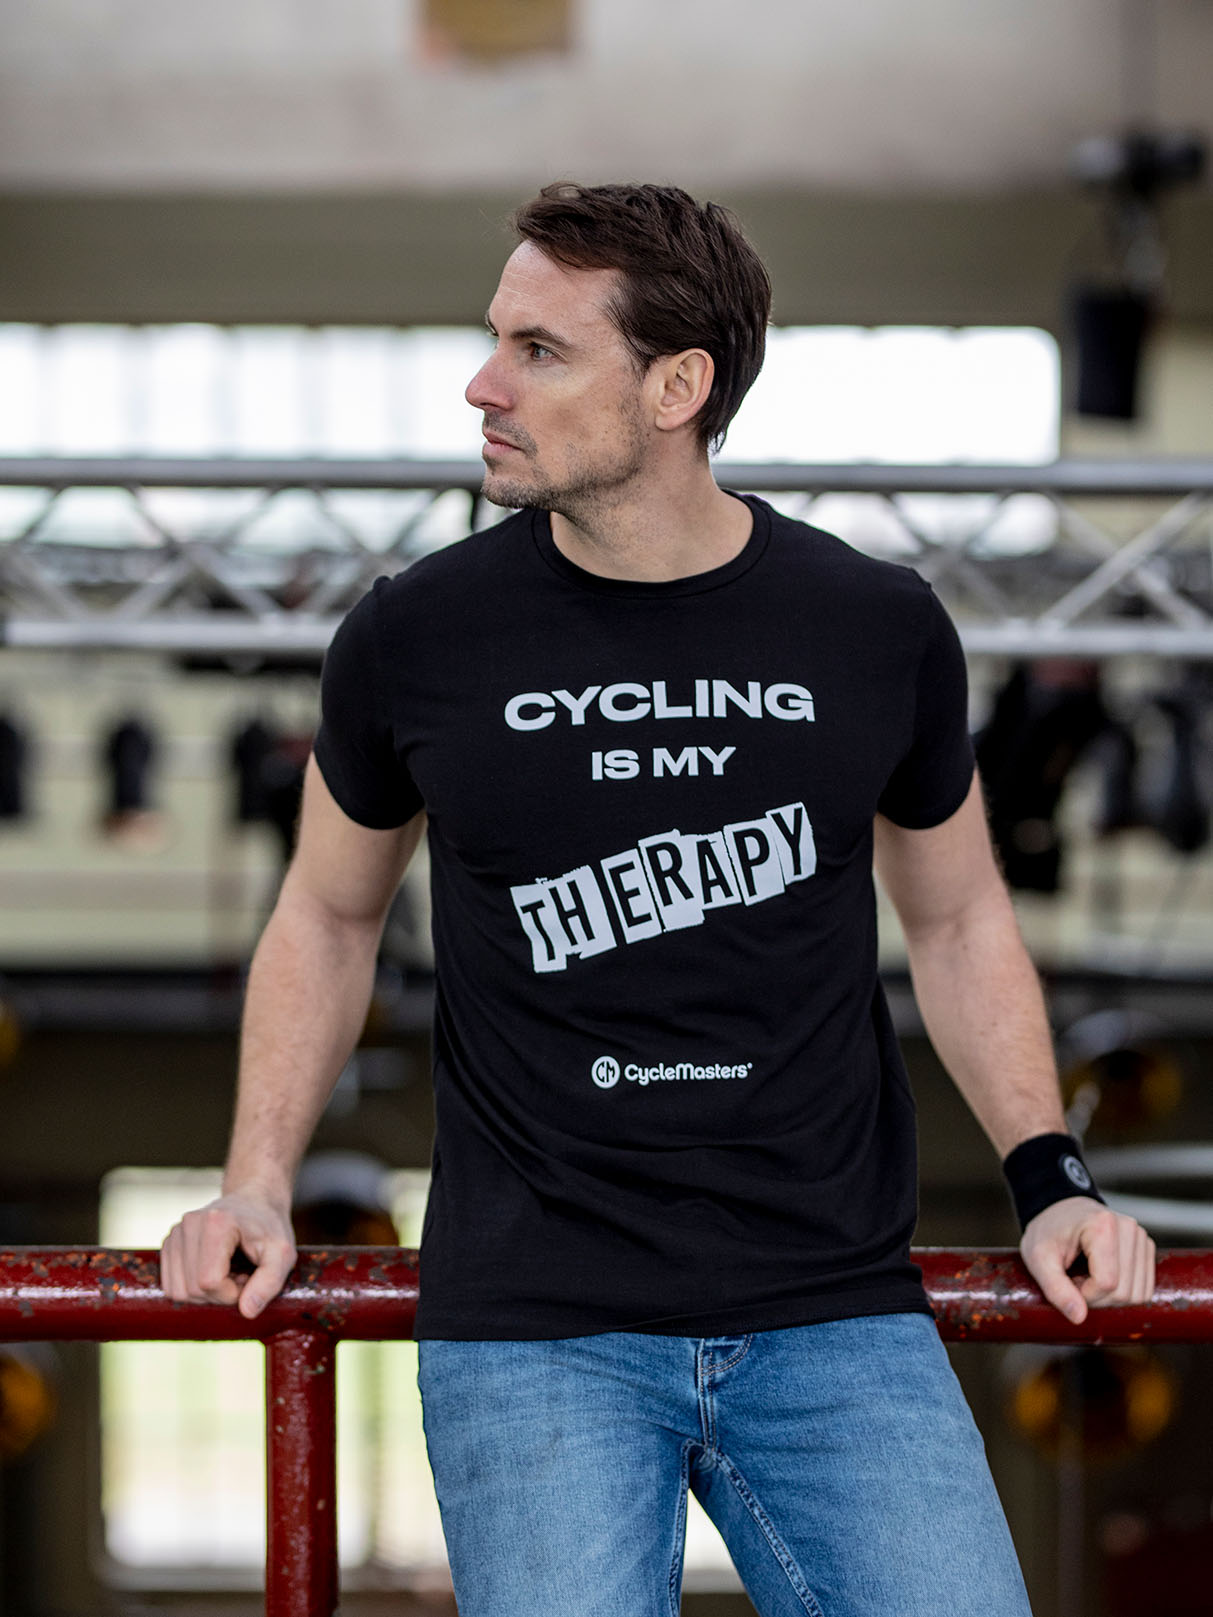 cyclemasters t-shirt with print